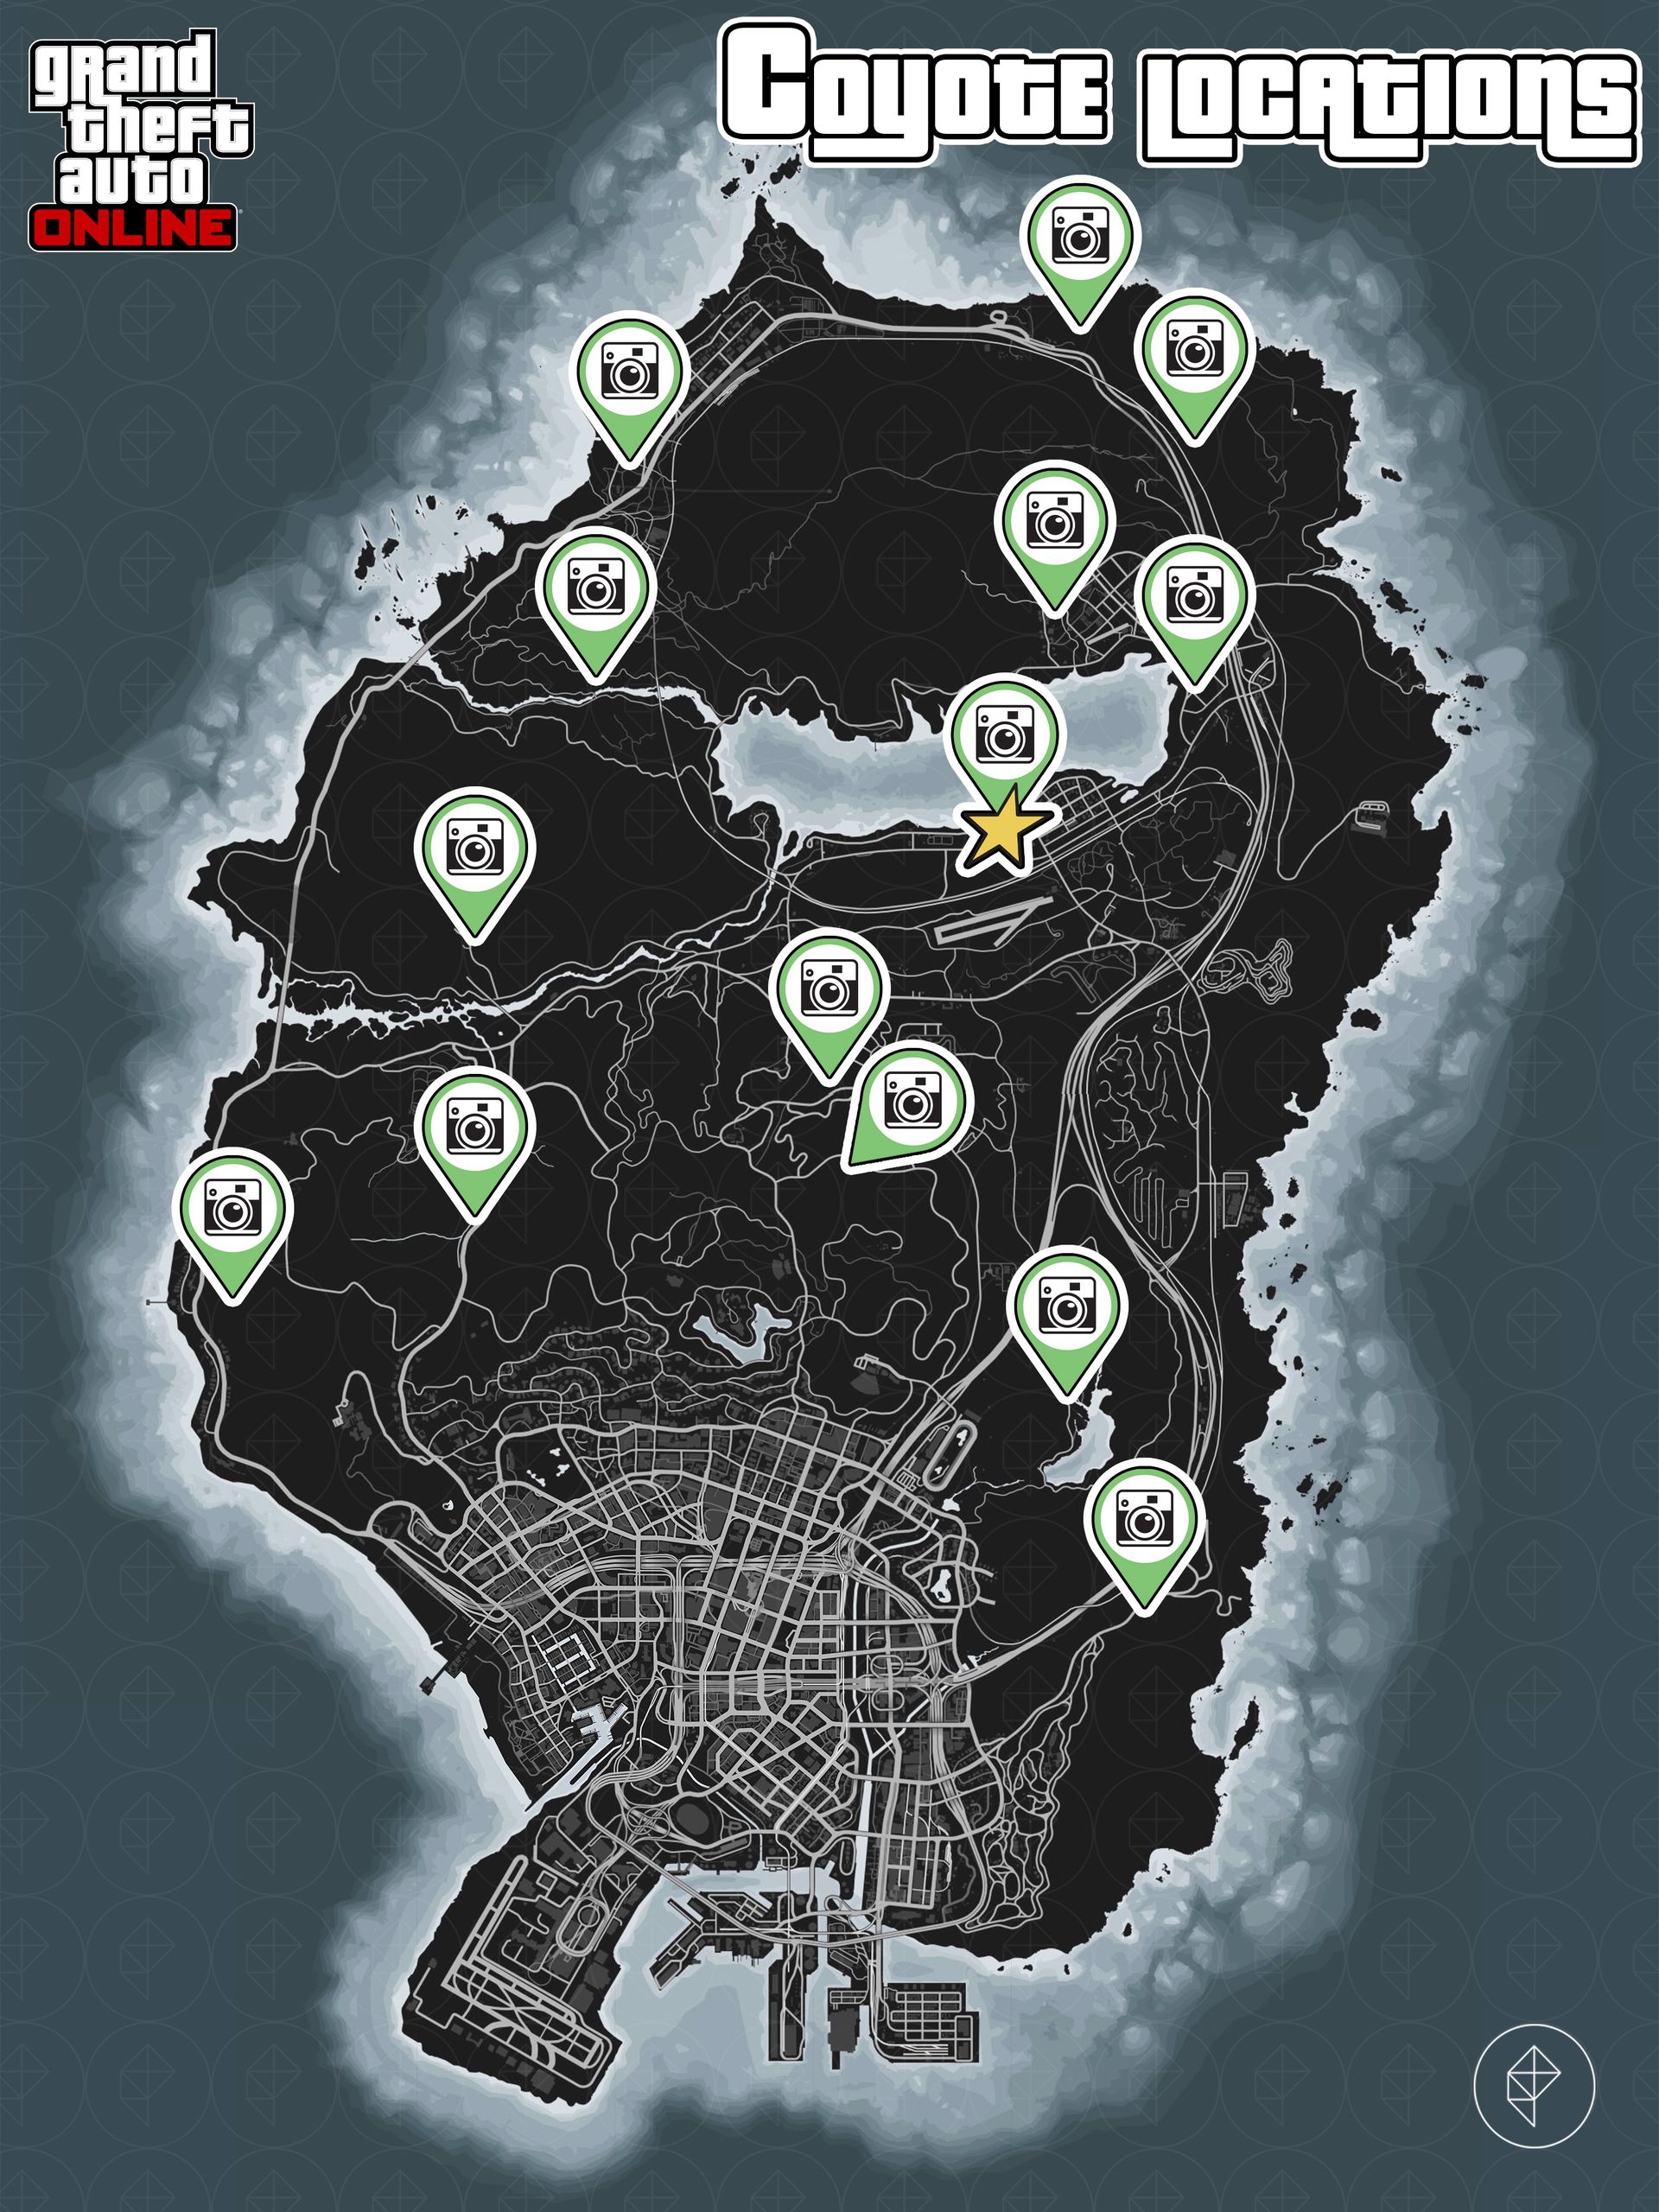 GTA Online map showing coyote locations